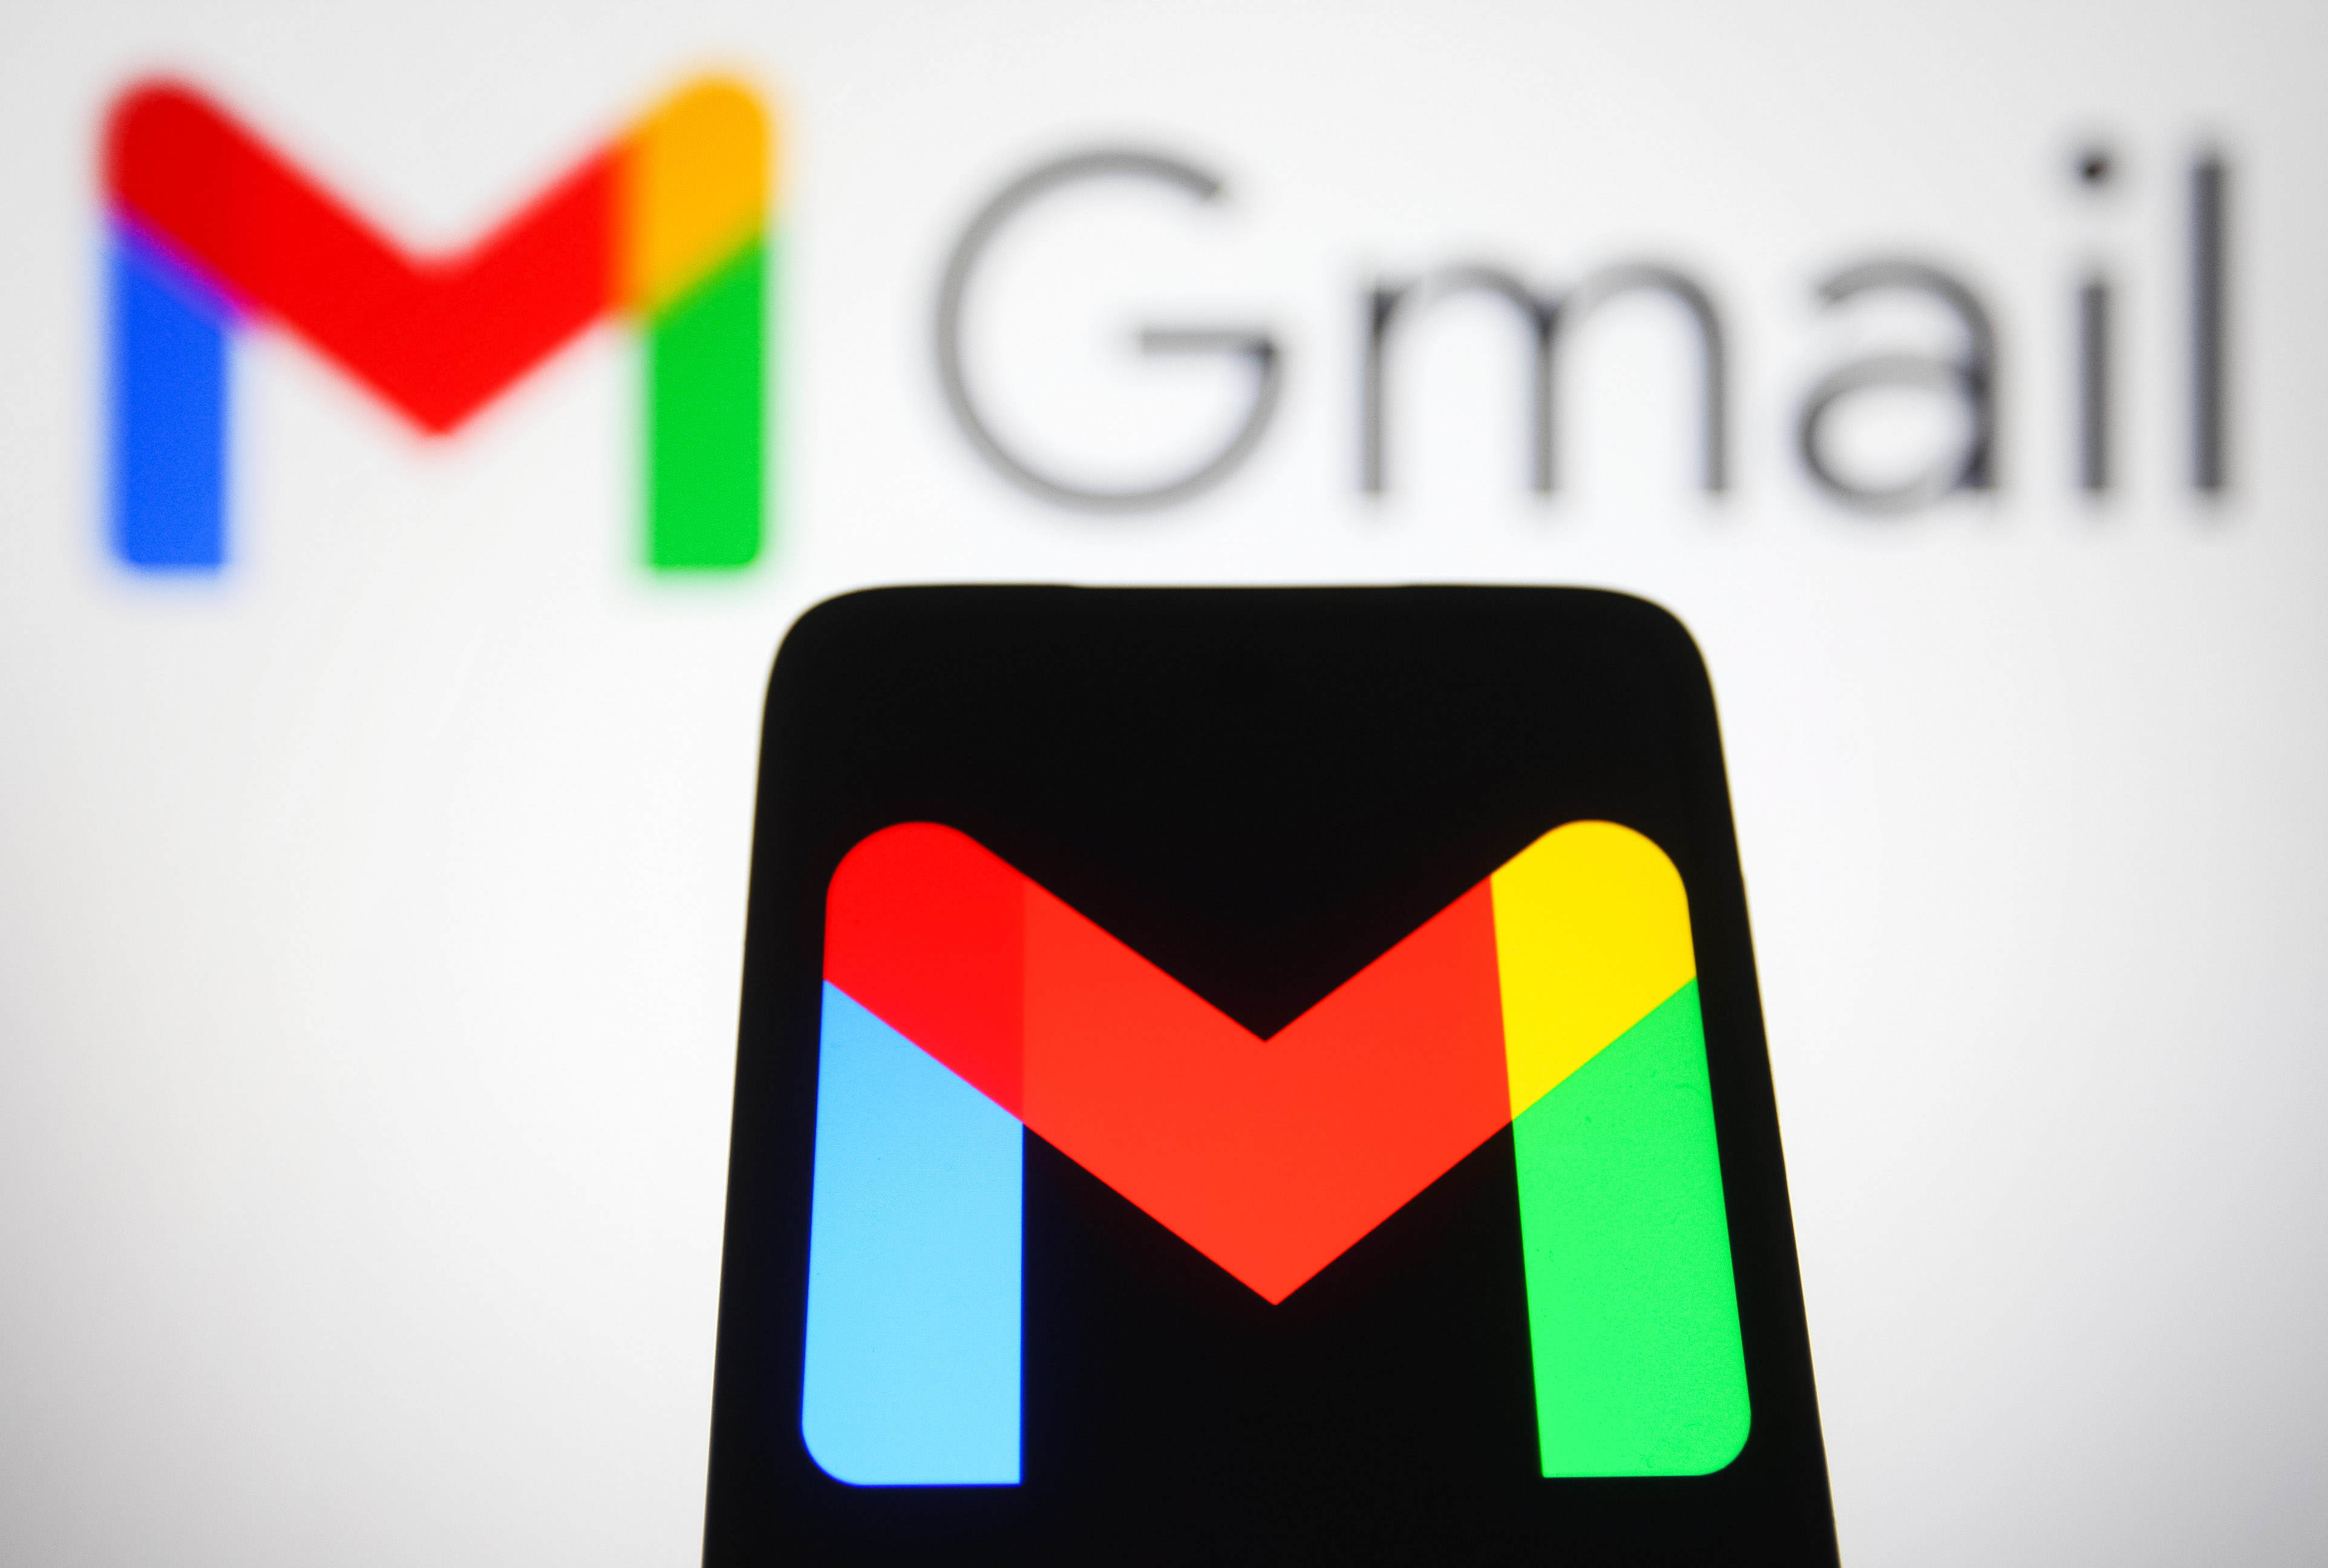 Gmail logo displayed on a smartphone and in the background